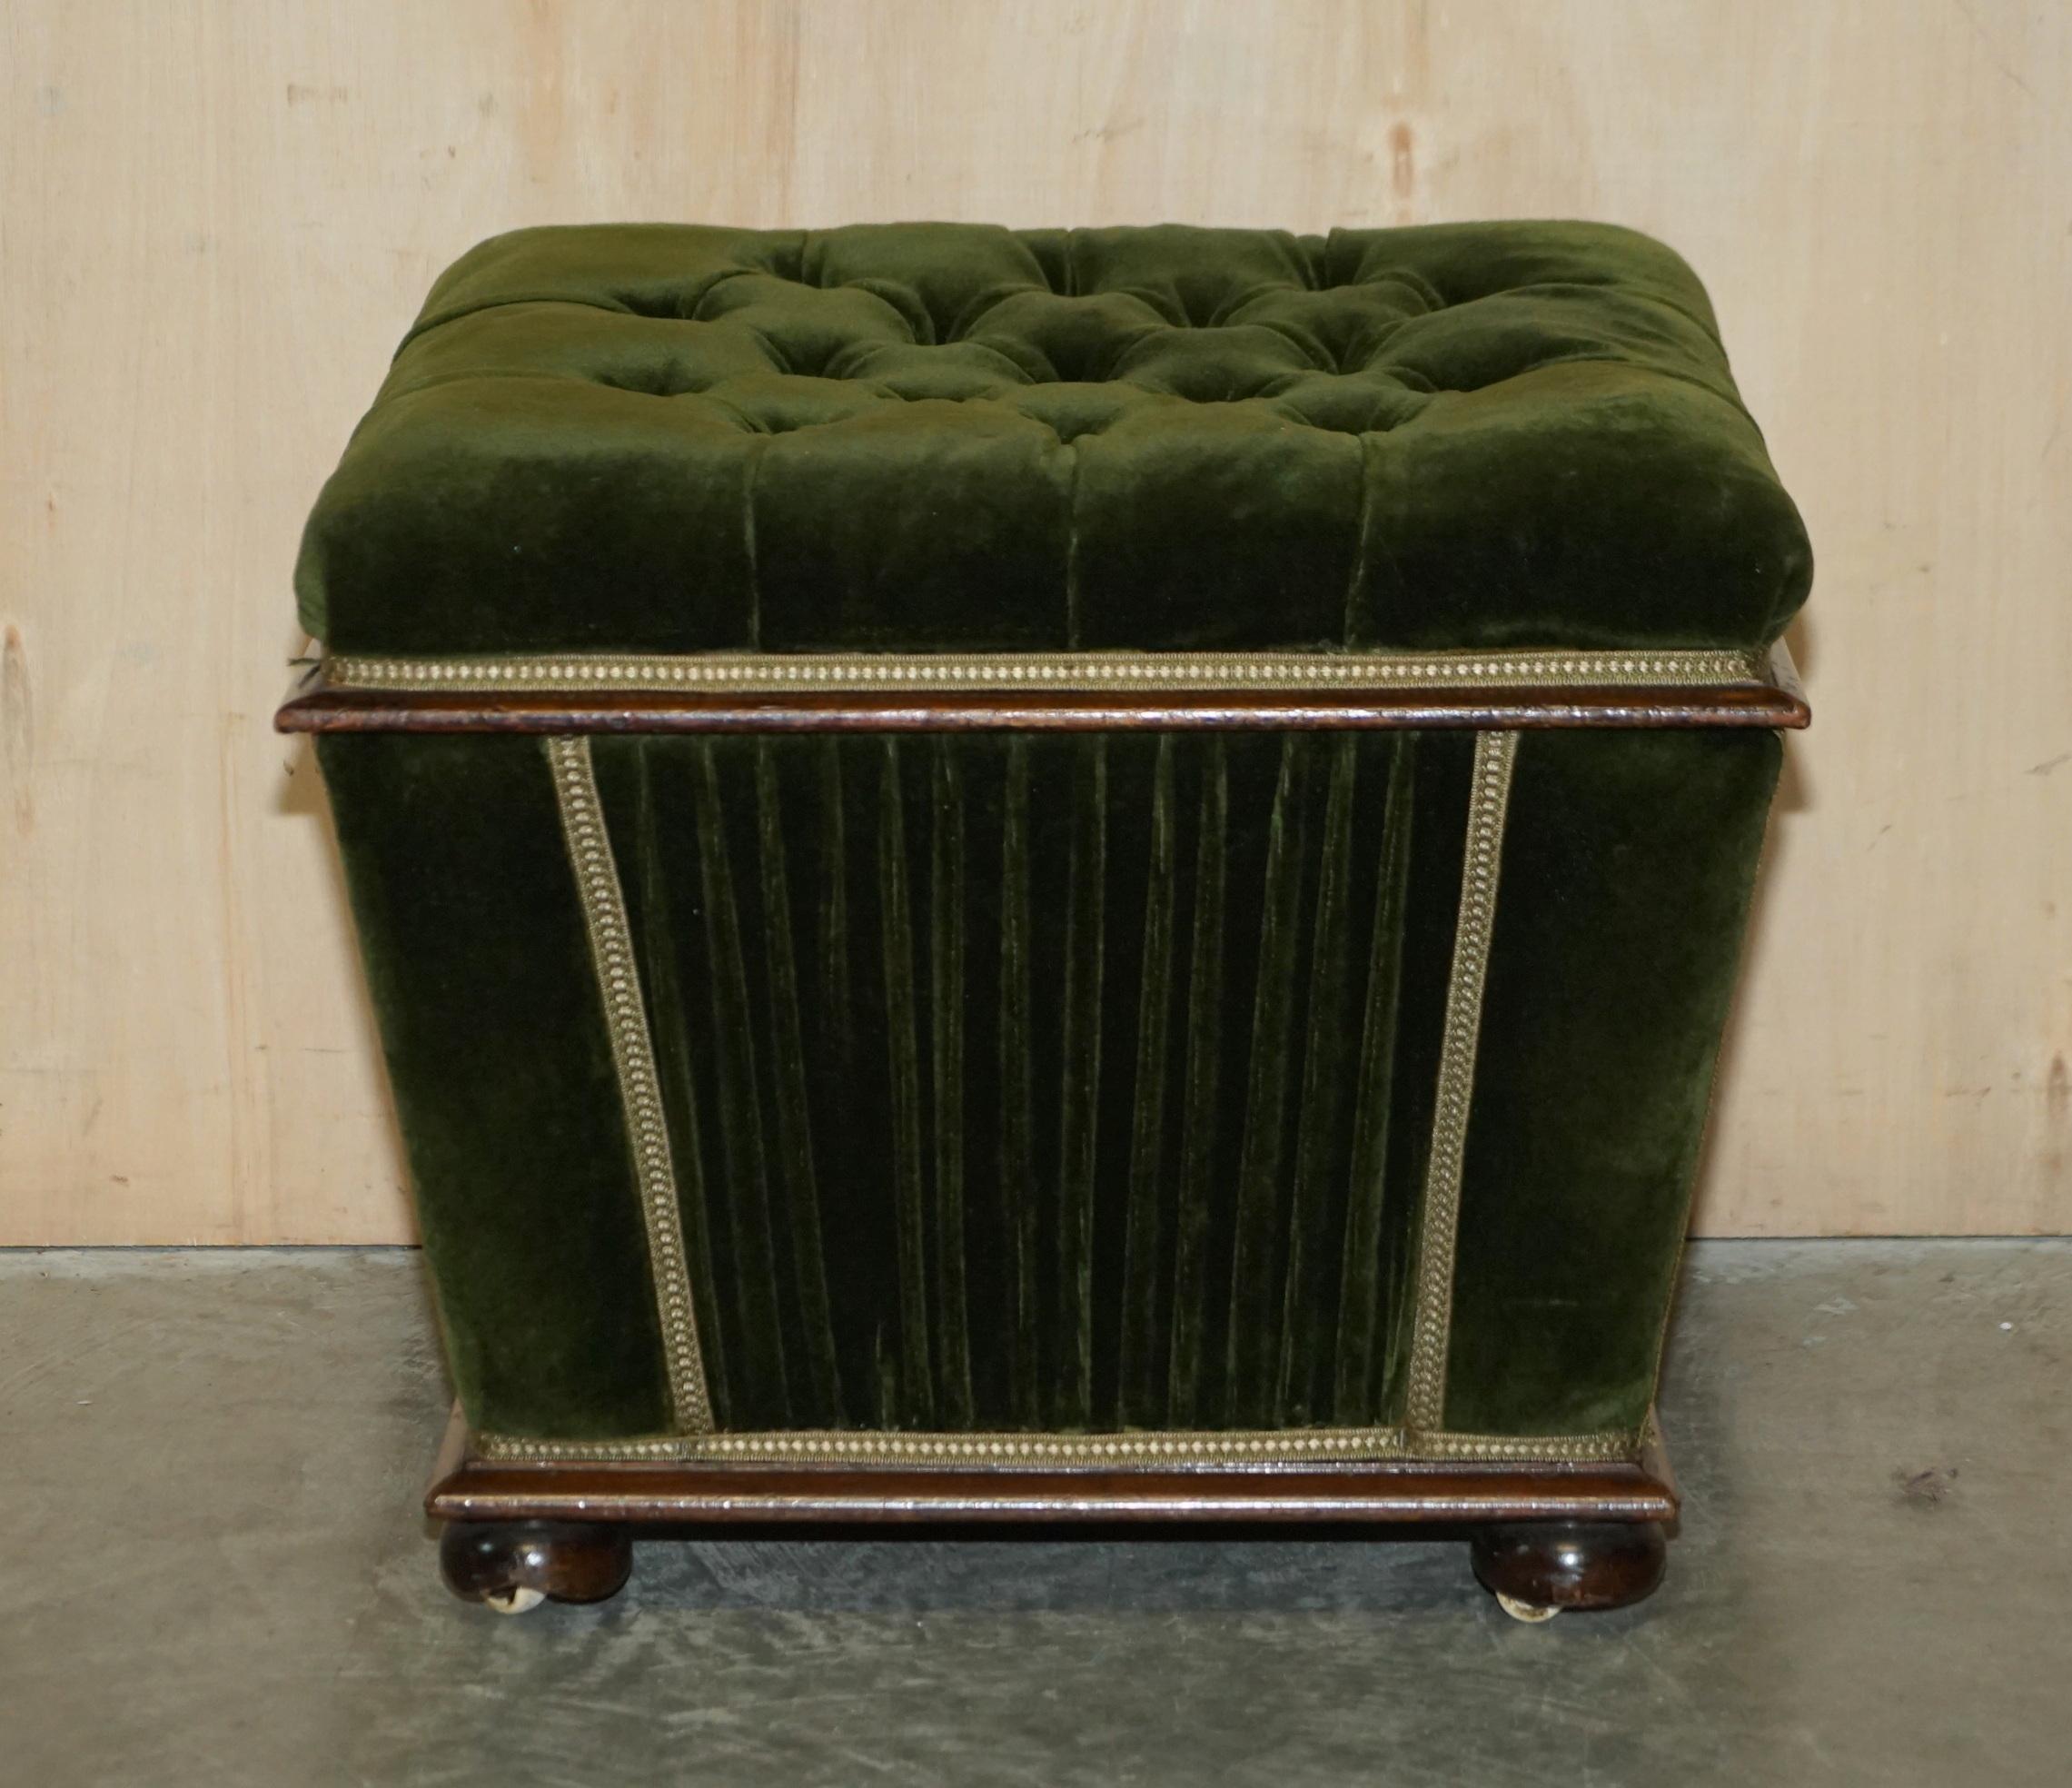 We are delighted to offer for sale this lovely original Regency Chesterfield tufted pitch pine ottoman stool 

A well made and good looking traditional Regency green velour Country House Ottoman. The frame is pitch pine as was correct for the